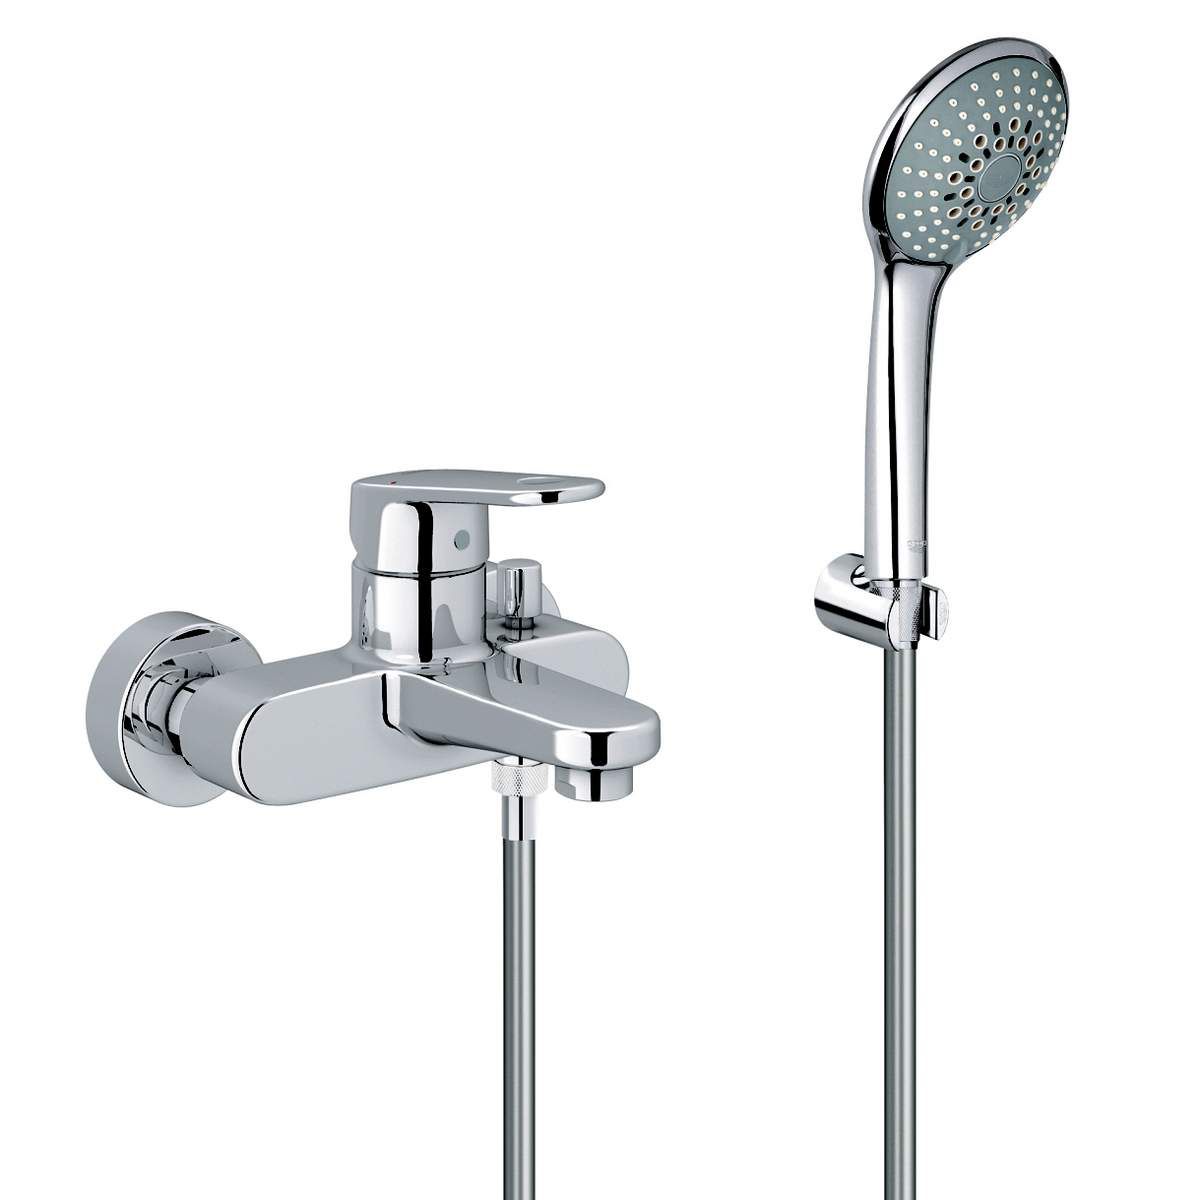 picture of a bath shower mixer tap